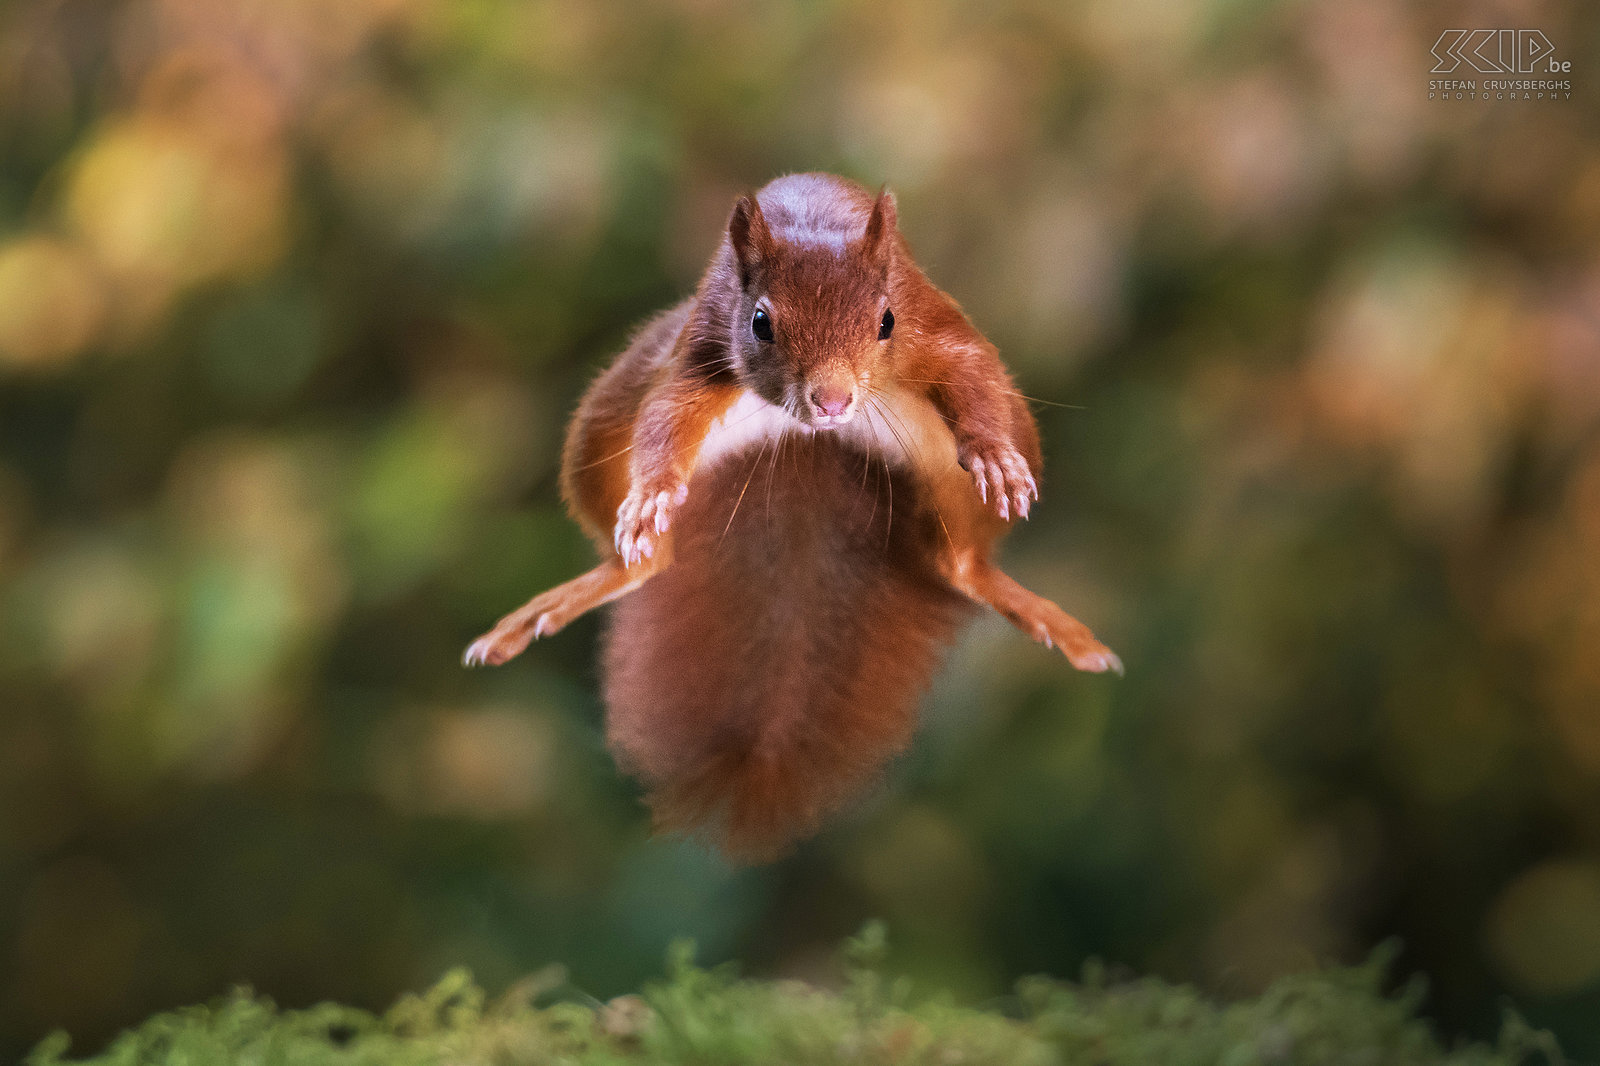 Jumping squirrel Squirrels can jump very far and it is a challenge to capture this on photo. During a jump they spread their limbs. Stefan Cruysberghs